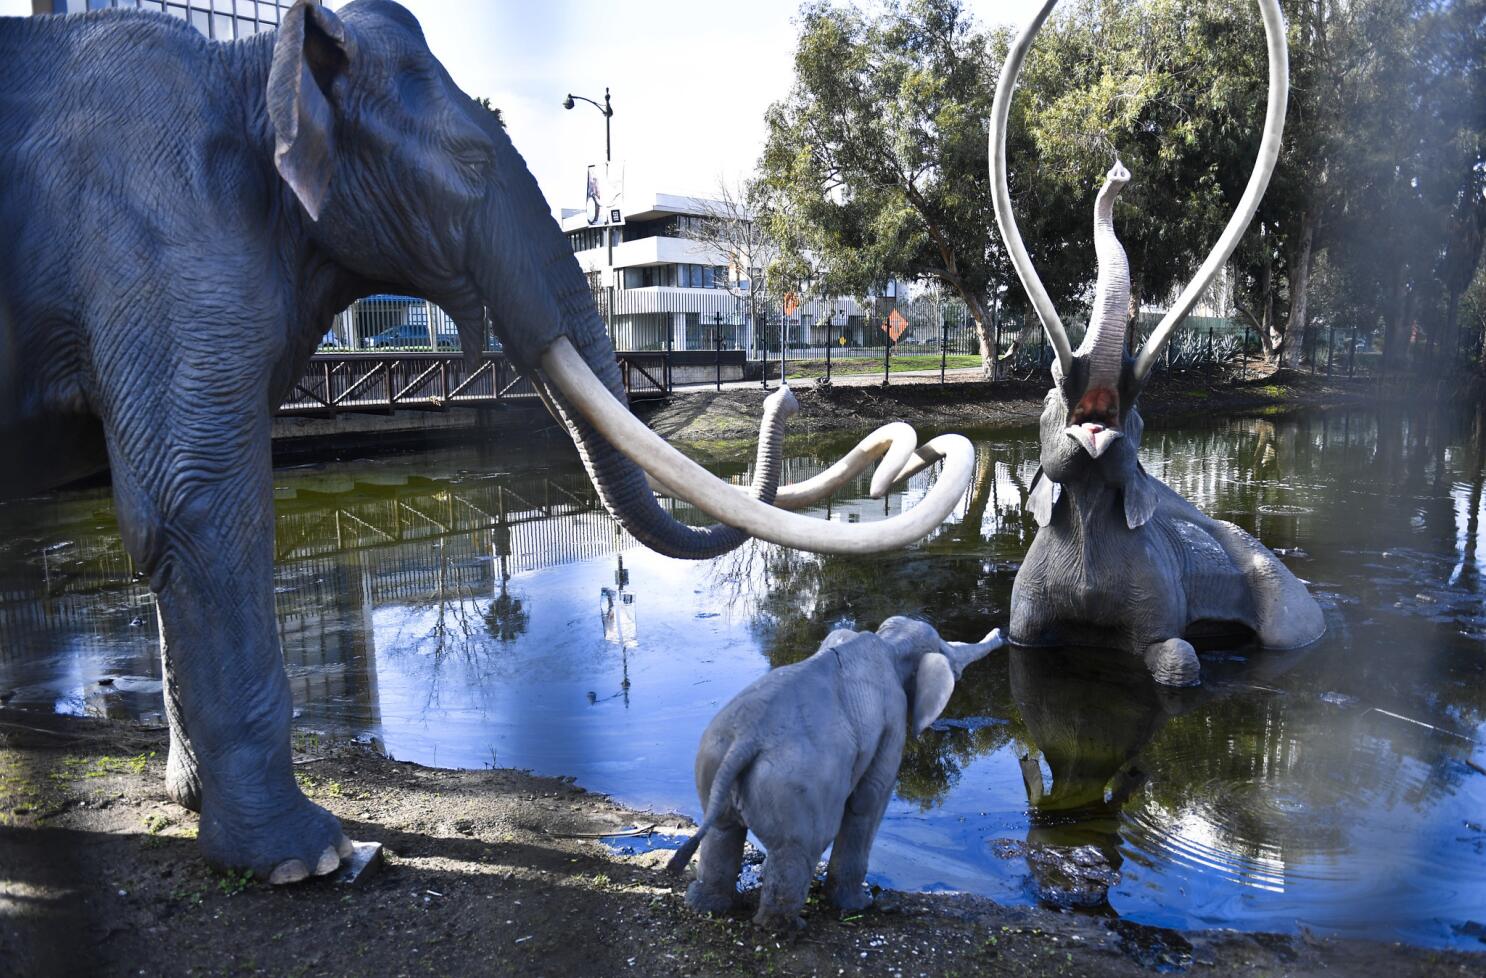 La Brea Tar Pits And Museum Admission